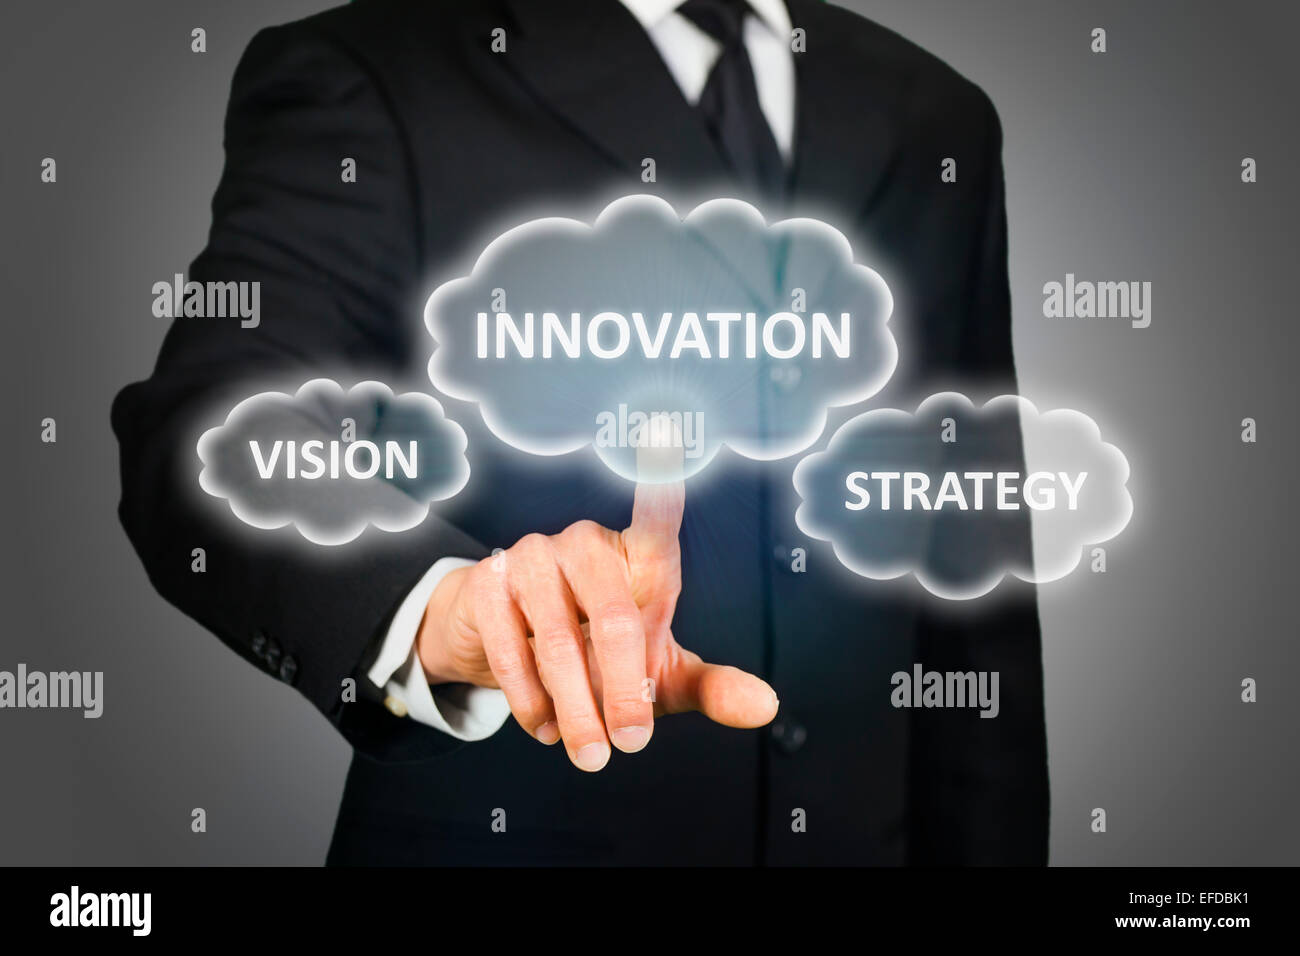 Business innovation, vision and strategy Stock Photo